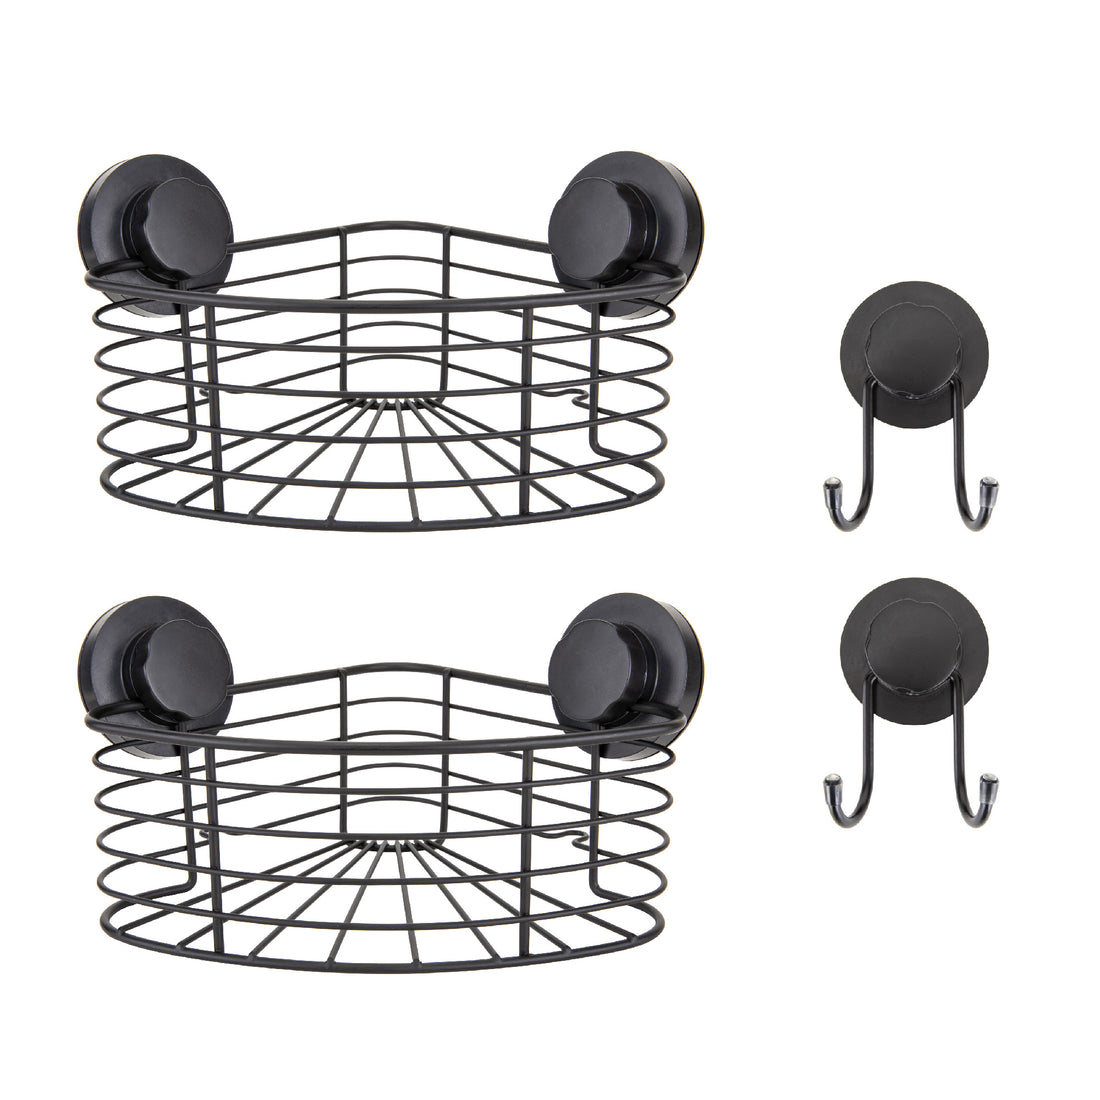 Suction Cups Replacement For Hooks Shower Caddy Sope Dish Set Of 2 Suction  Cups